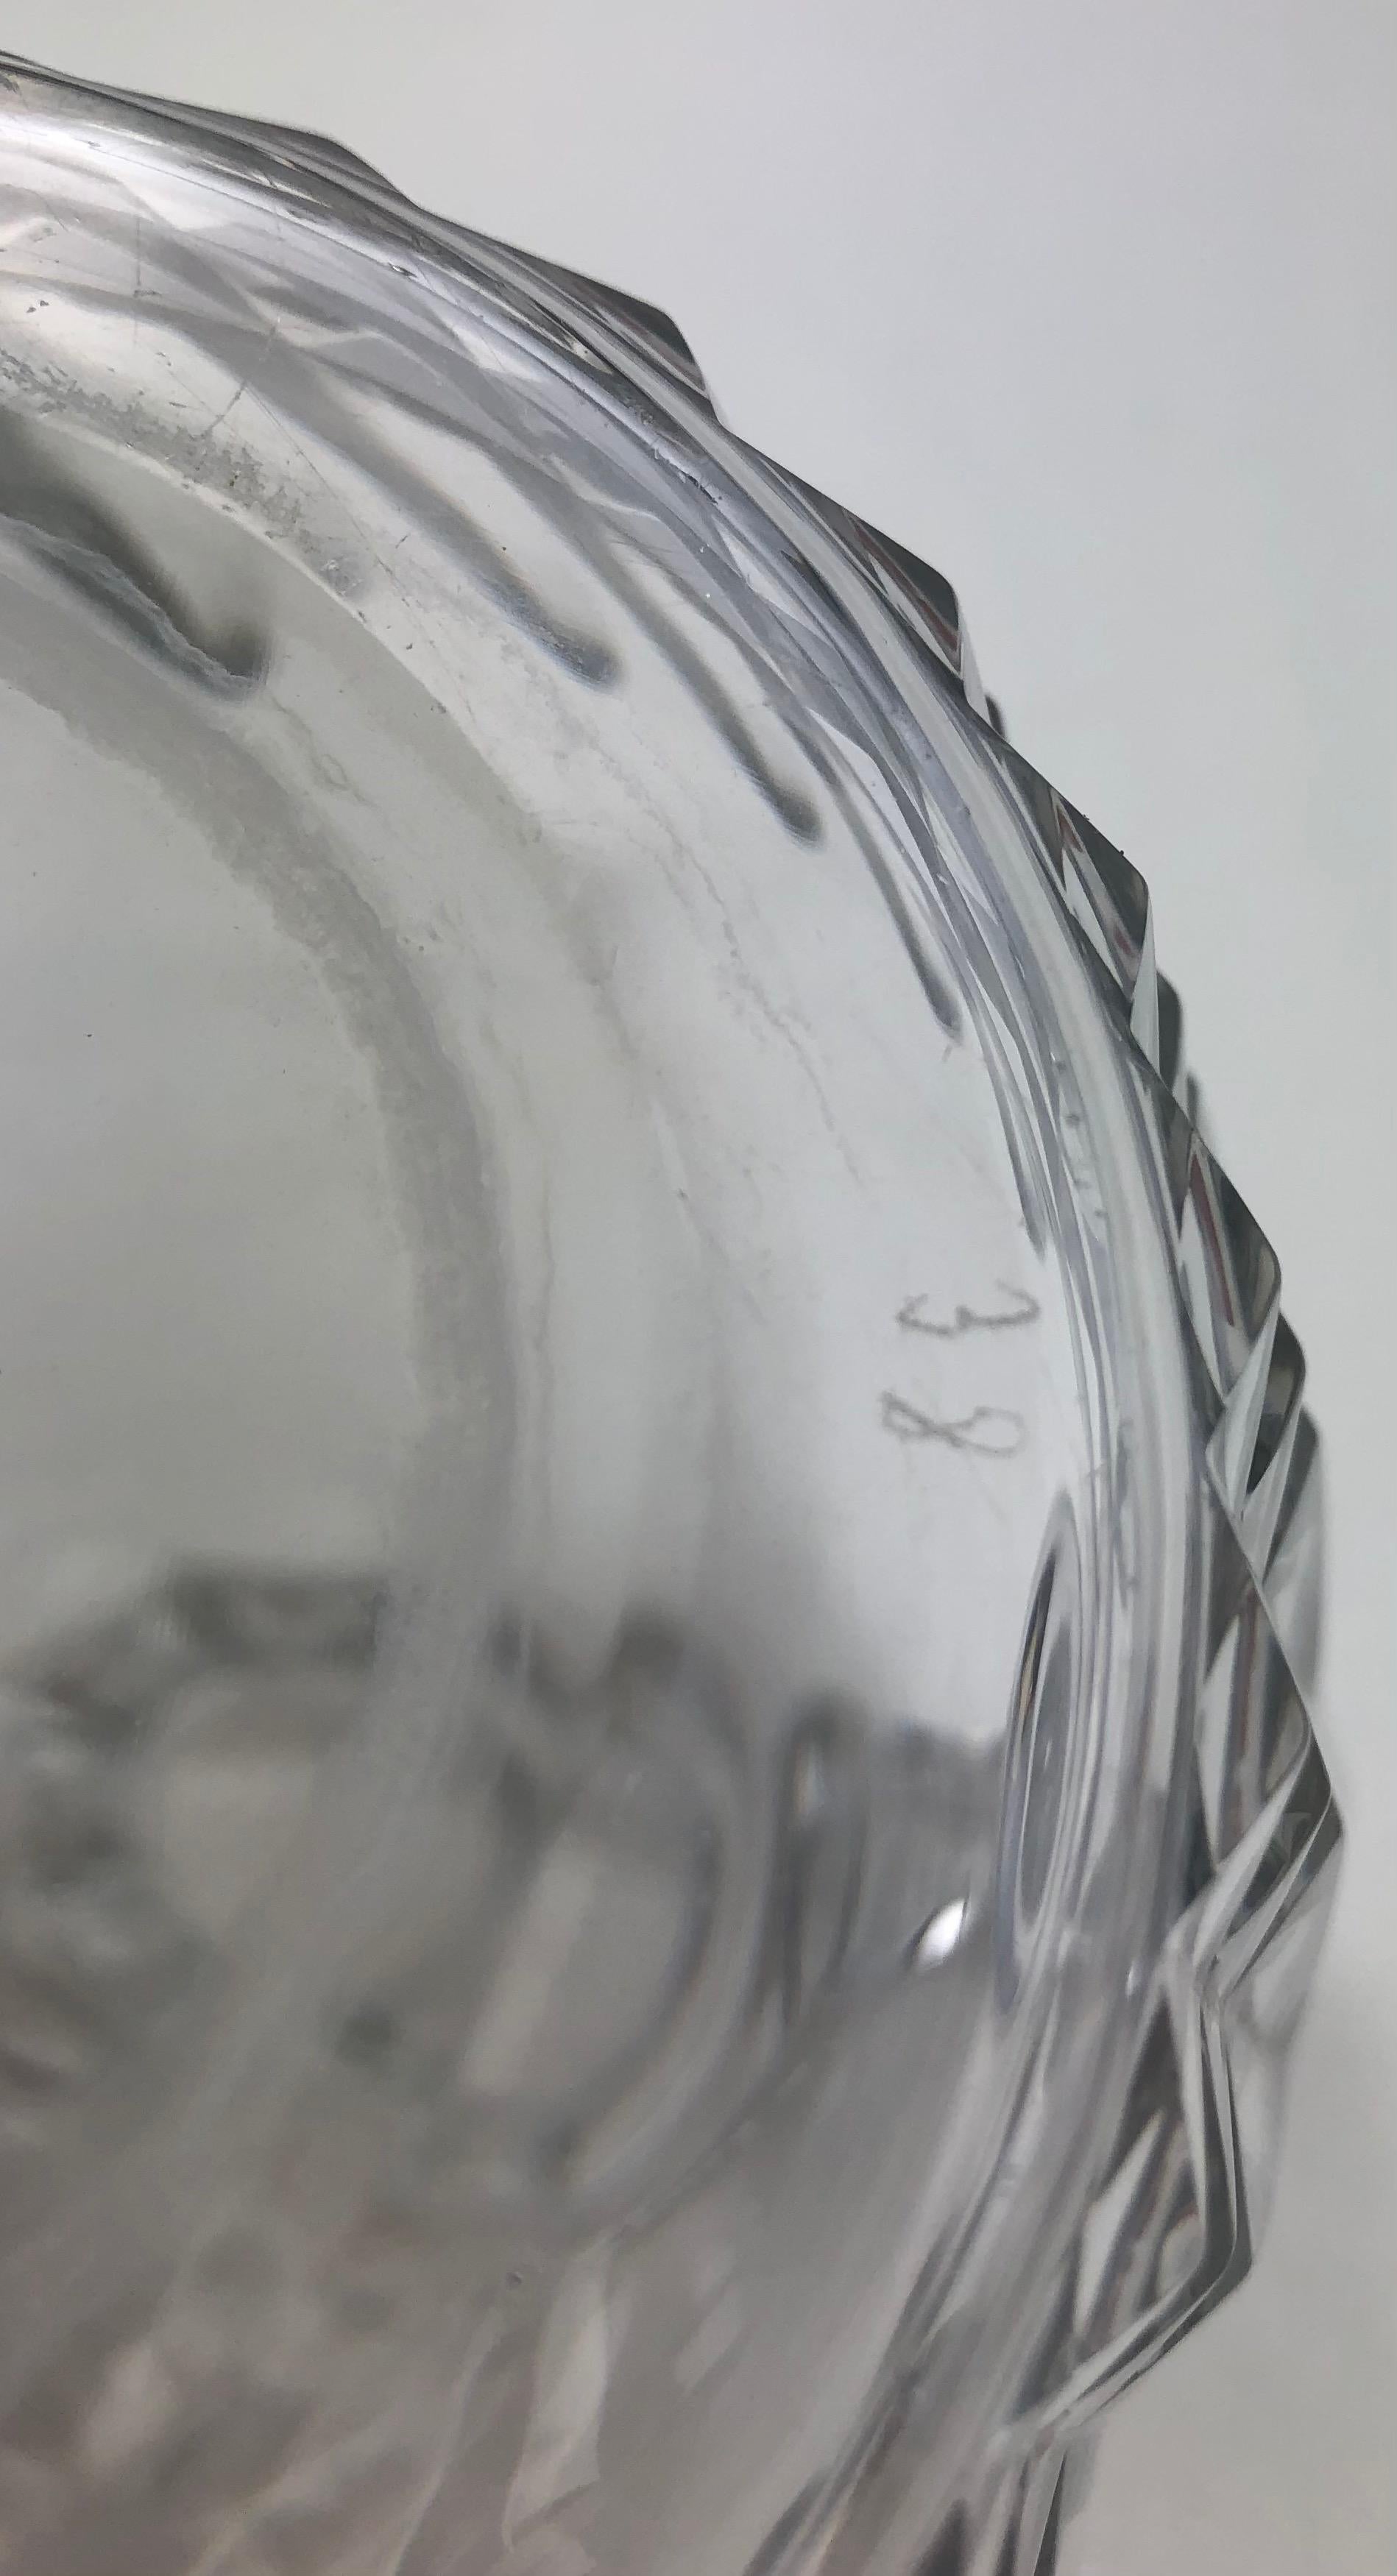 Baccarat Crystal Liquor Decanter or Carafe, Mid-20th Century 1